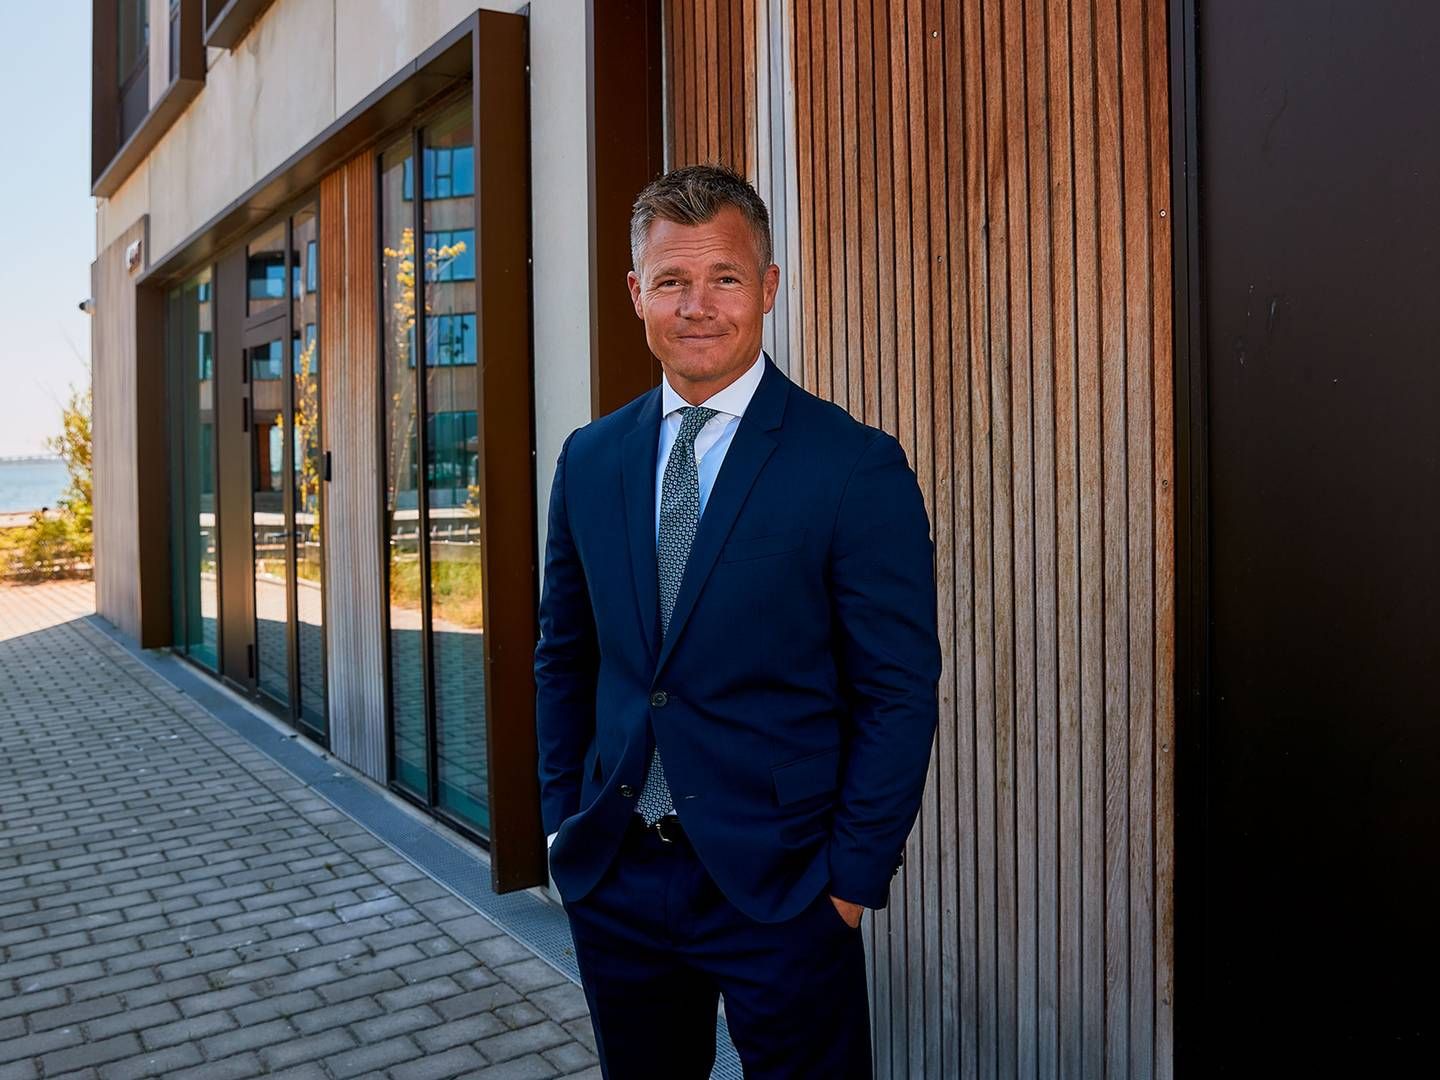 Jesper Nielsen, Monjasa's head of sustainability, doesn't want to expose the competition, but rather offer a helping hand. "Instead, we need to come together and point out why things aren't moving so fast and try to solve it from below."